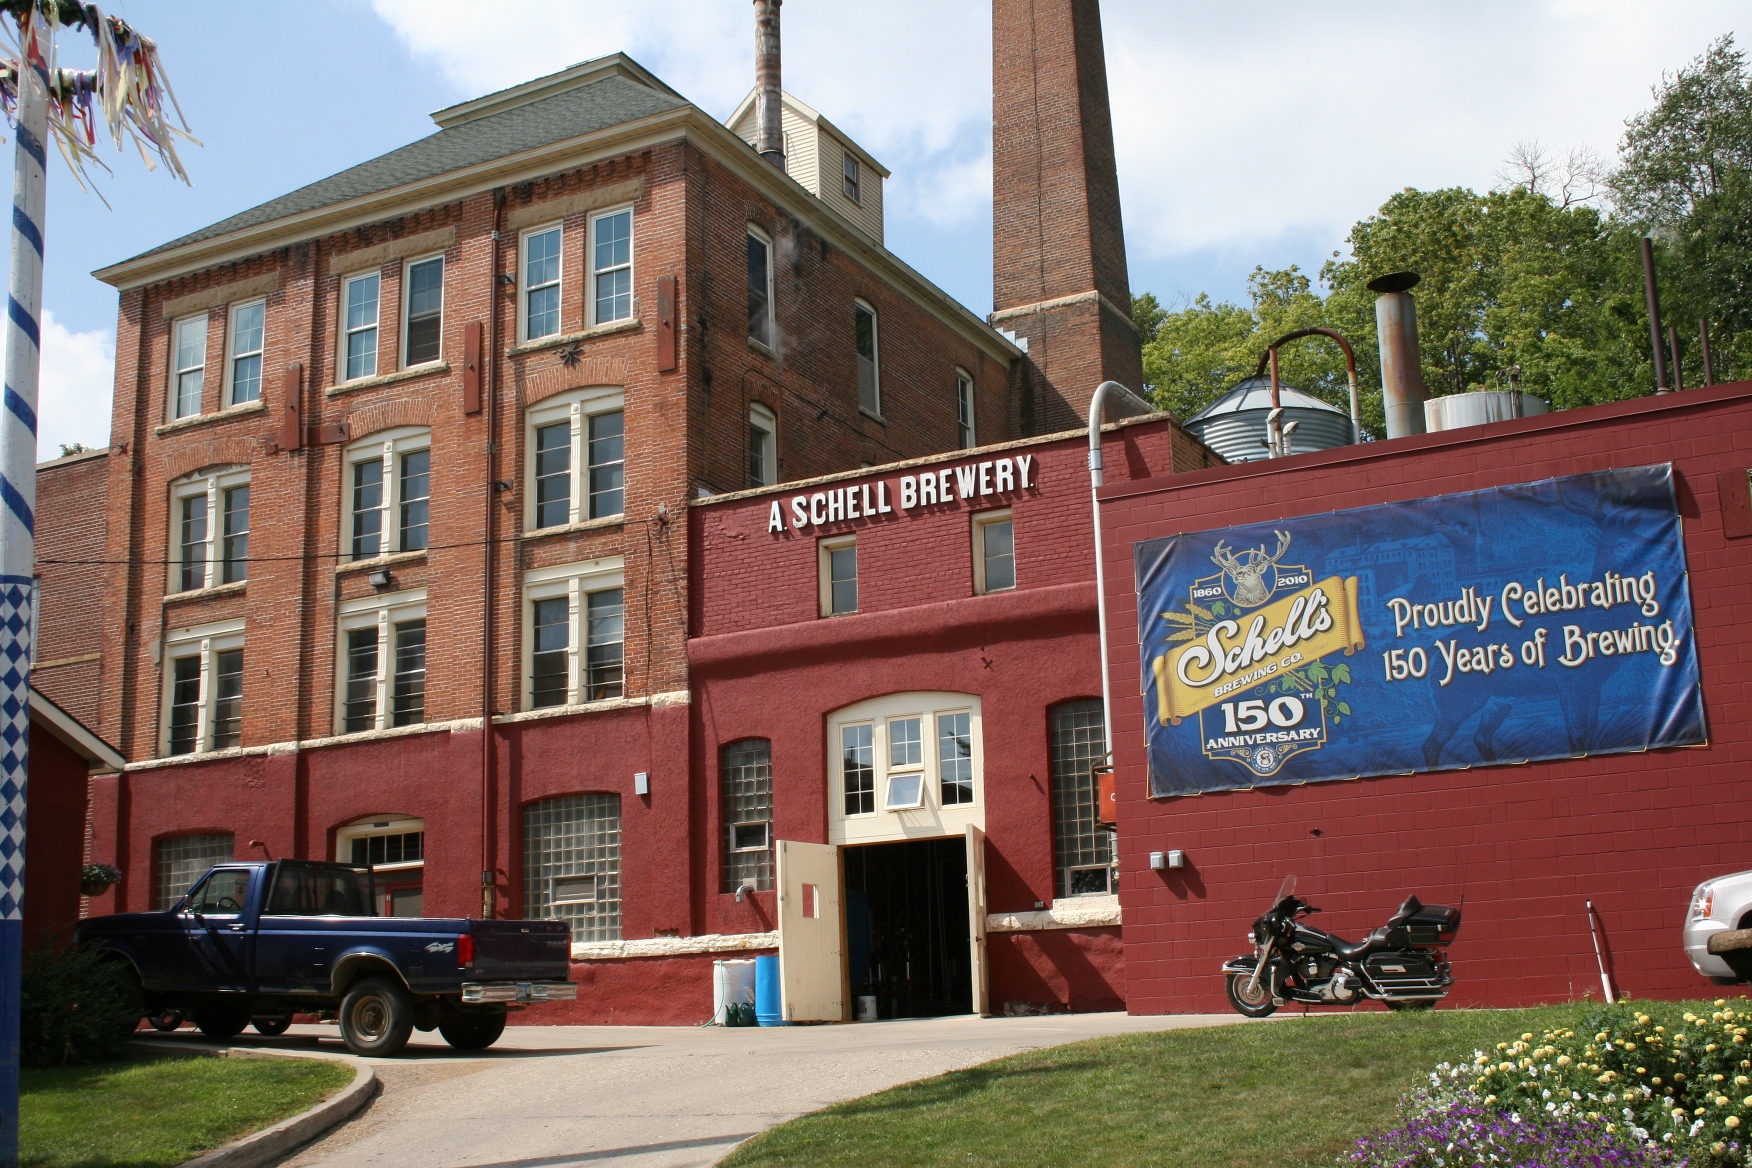 schells-brewery-2014-beer controversy-brewers association